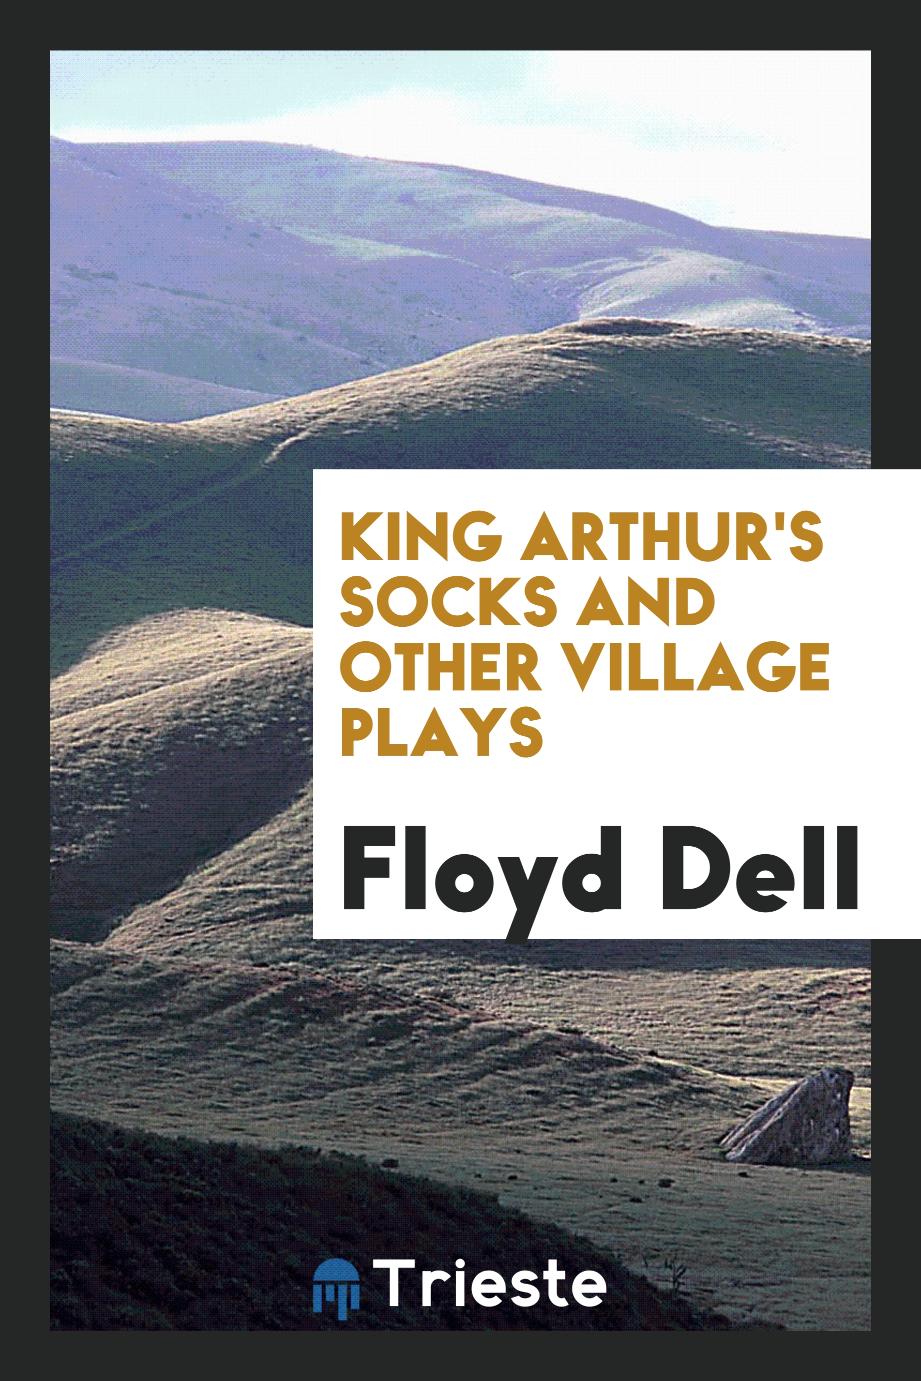 King Arthur's socks and other village plays